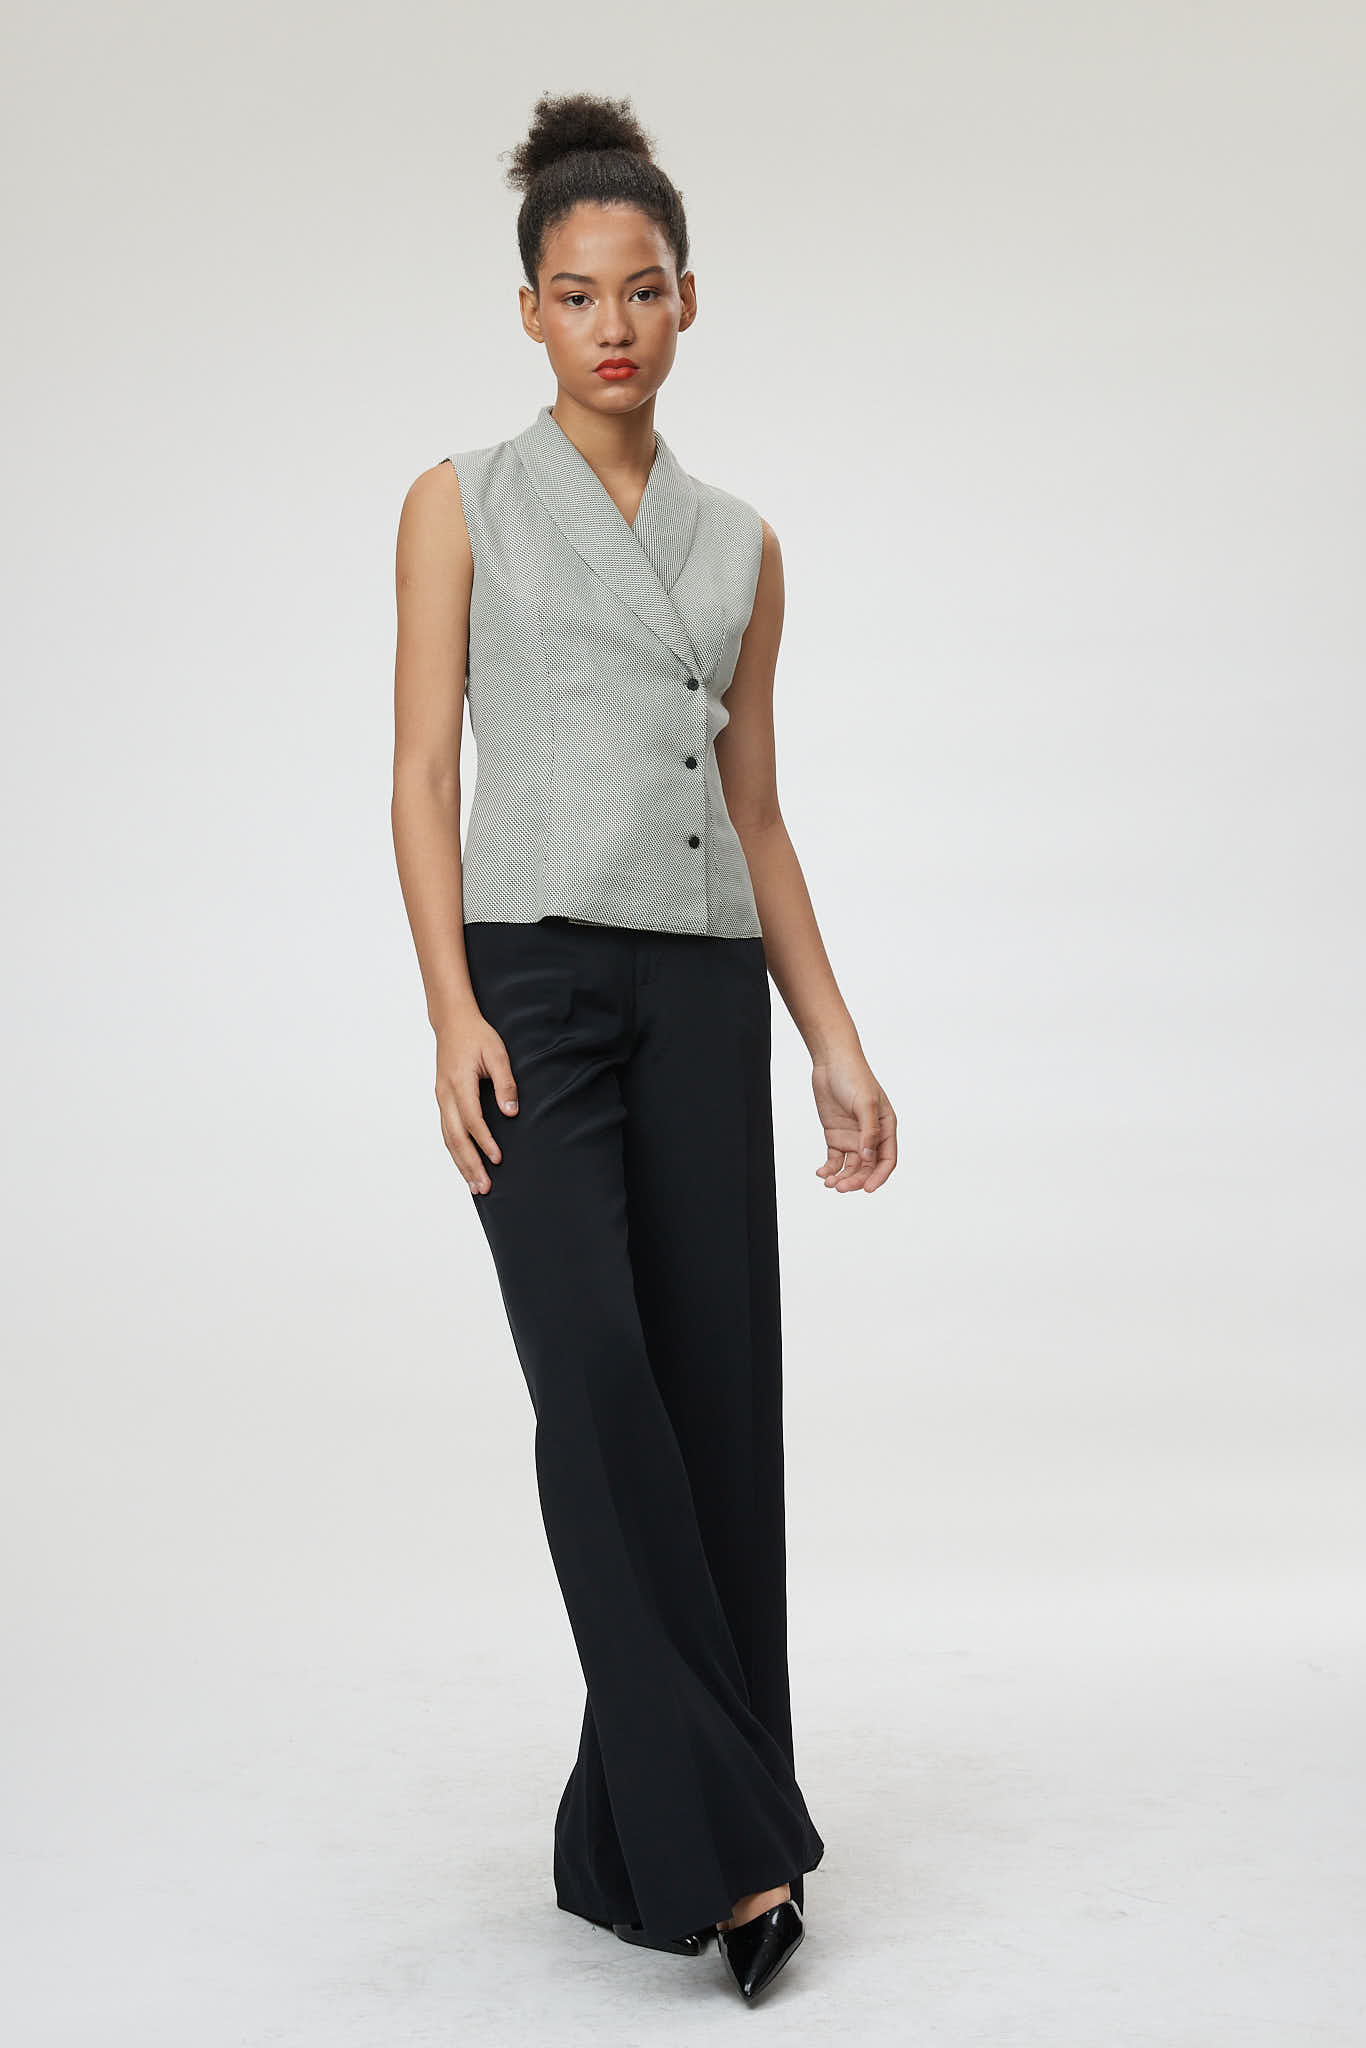 Modena Trouser – Palazzo fluid trousers in black